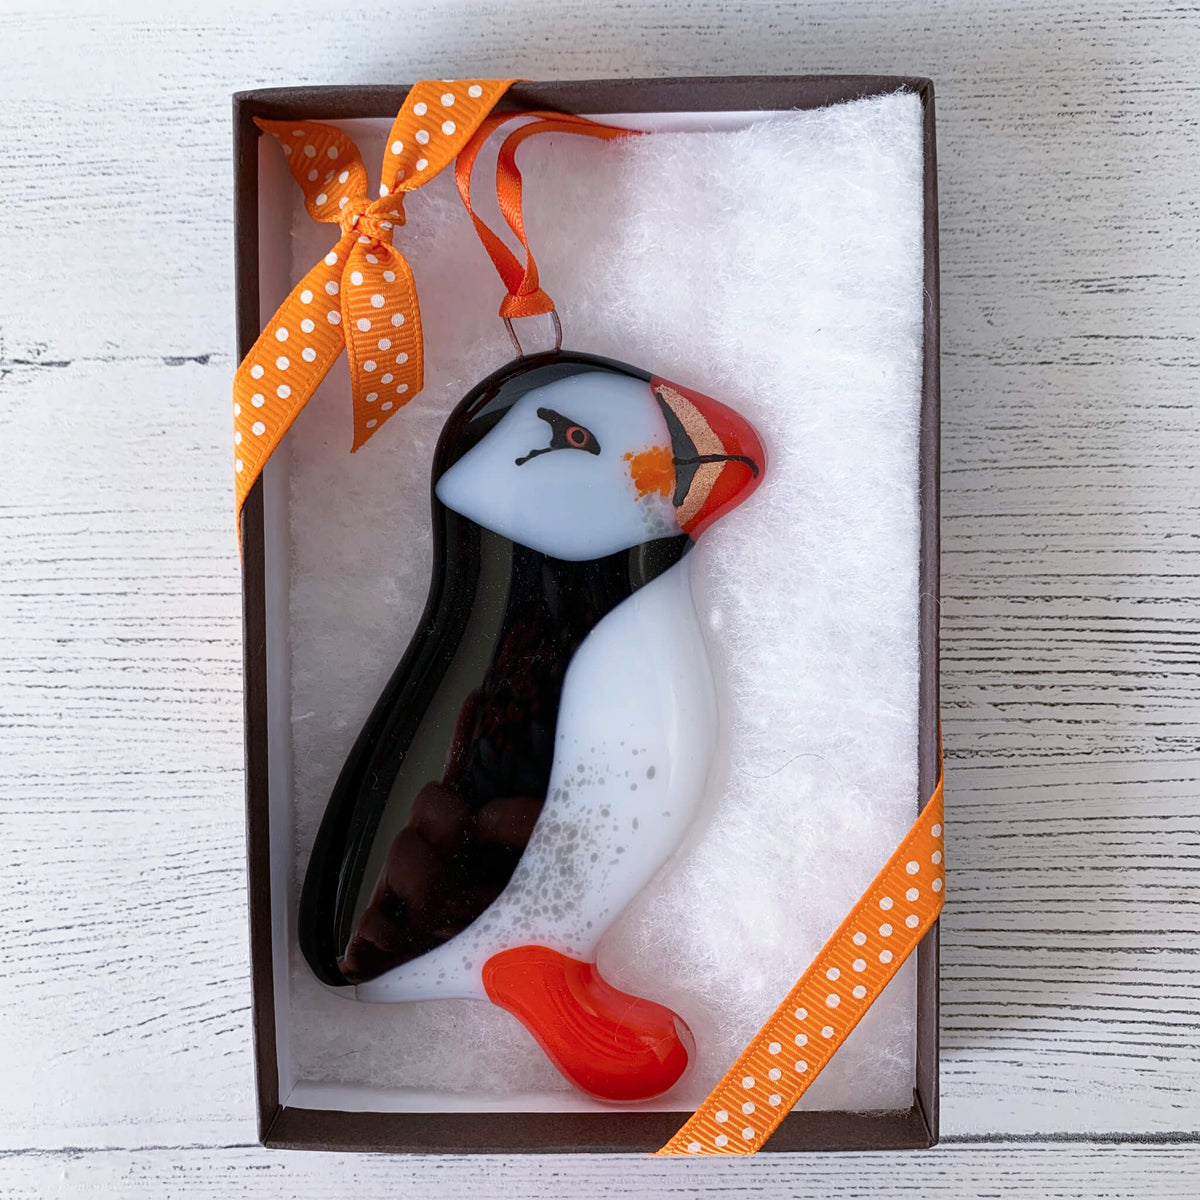 Handmade Boxed Fused Glass Puffin hanging, by Sarah Myatt. With orange spotted ribbon on box.